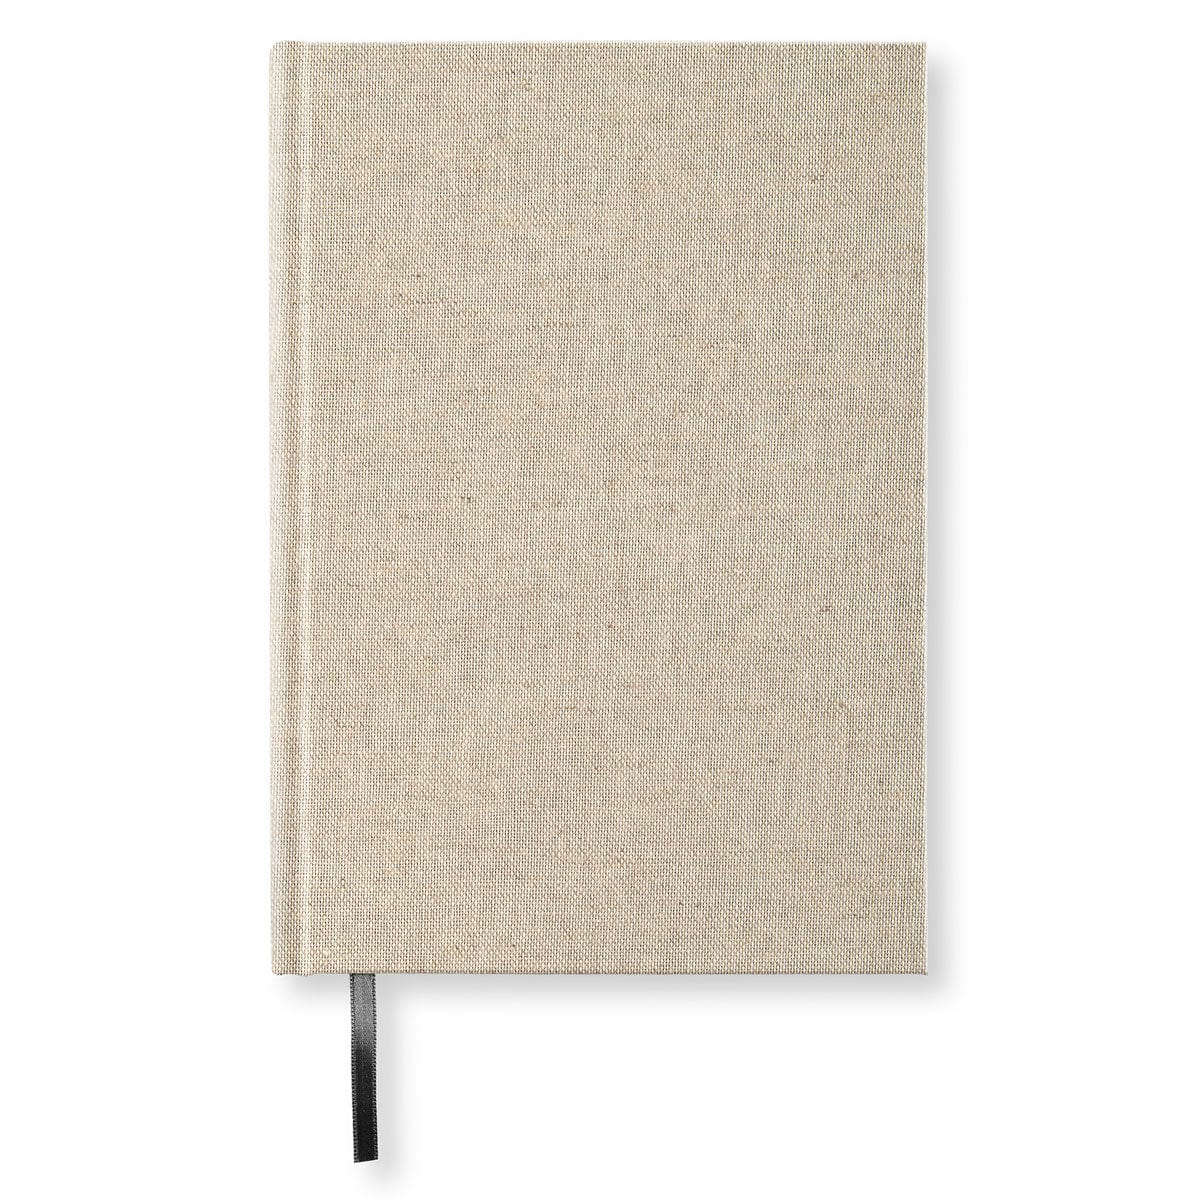 PaperStyle Paperstyle NOTEBOOK A5 256p. Ruled Rough Linen